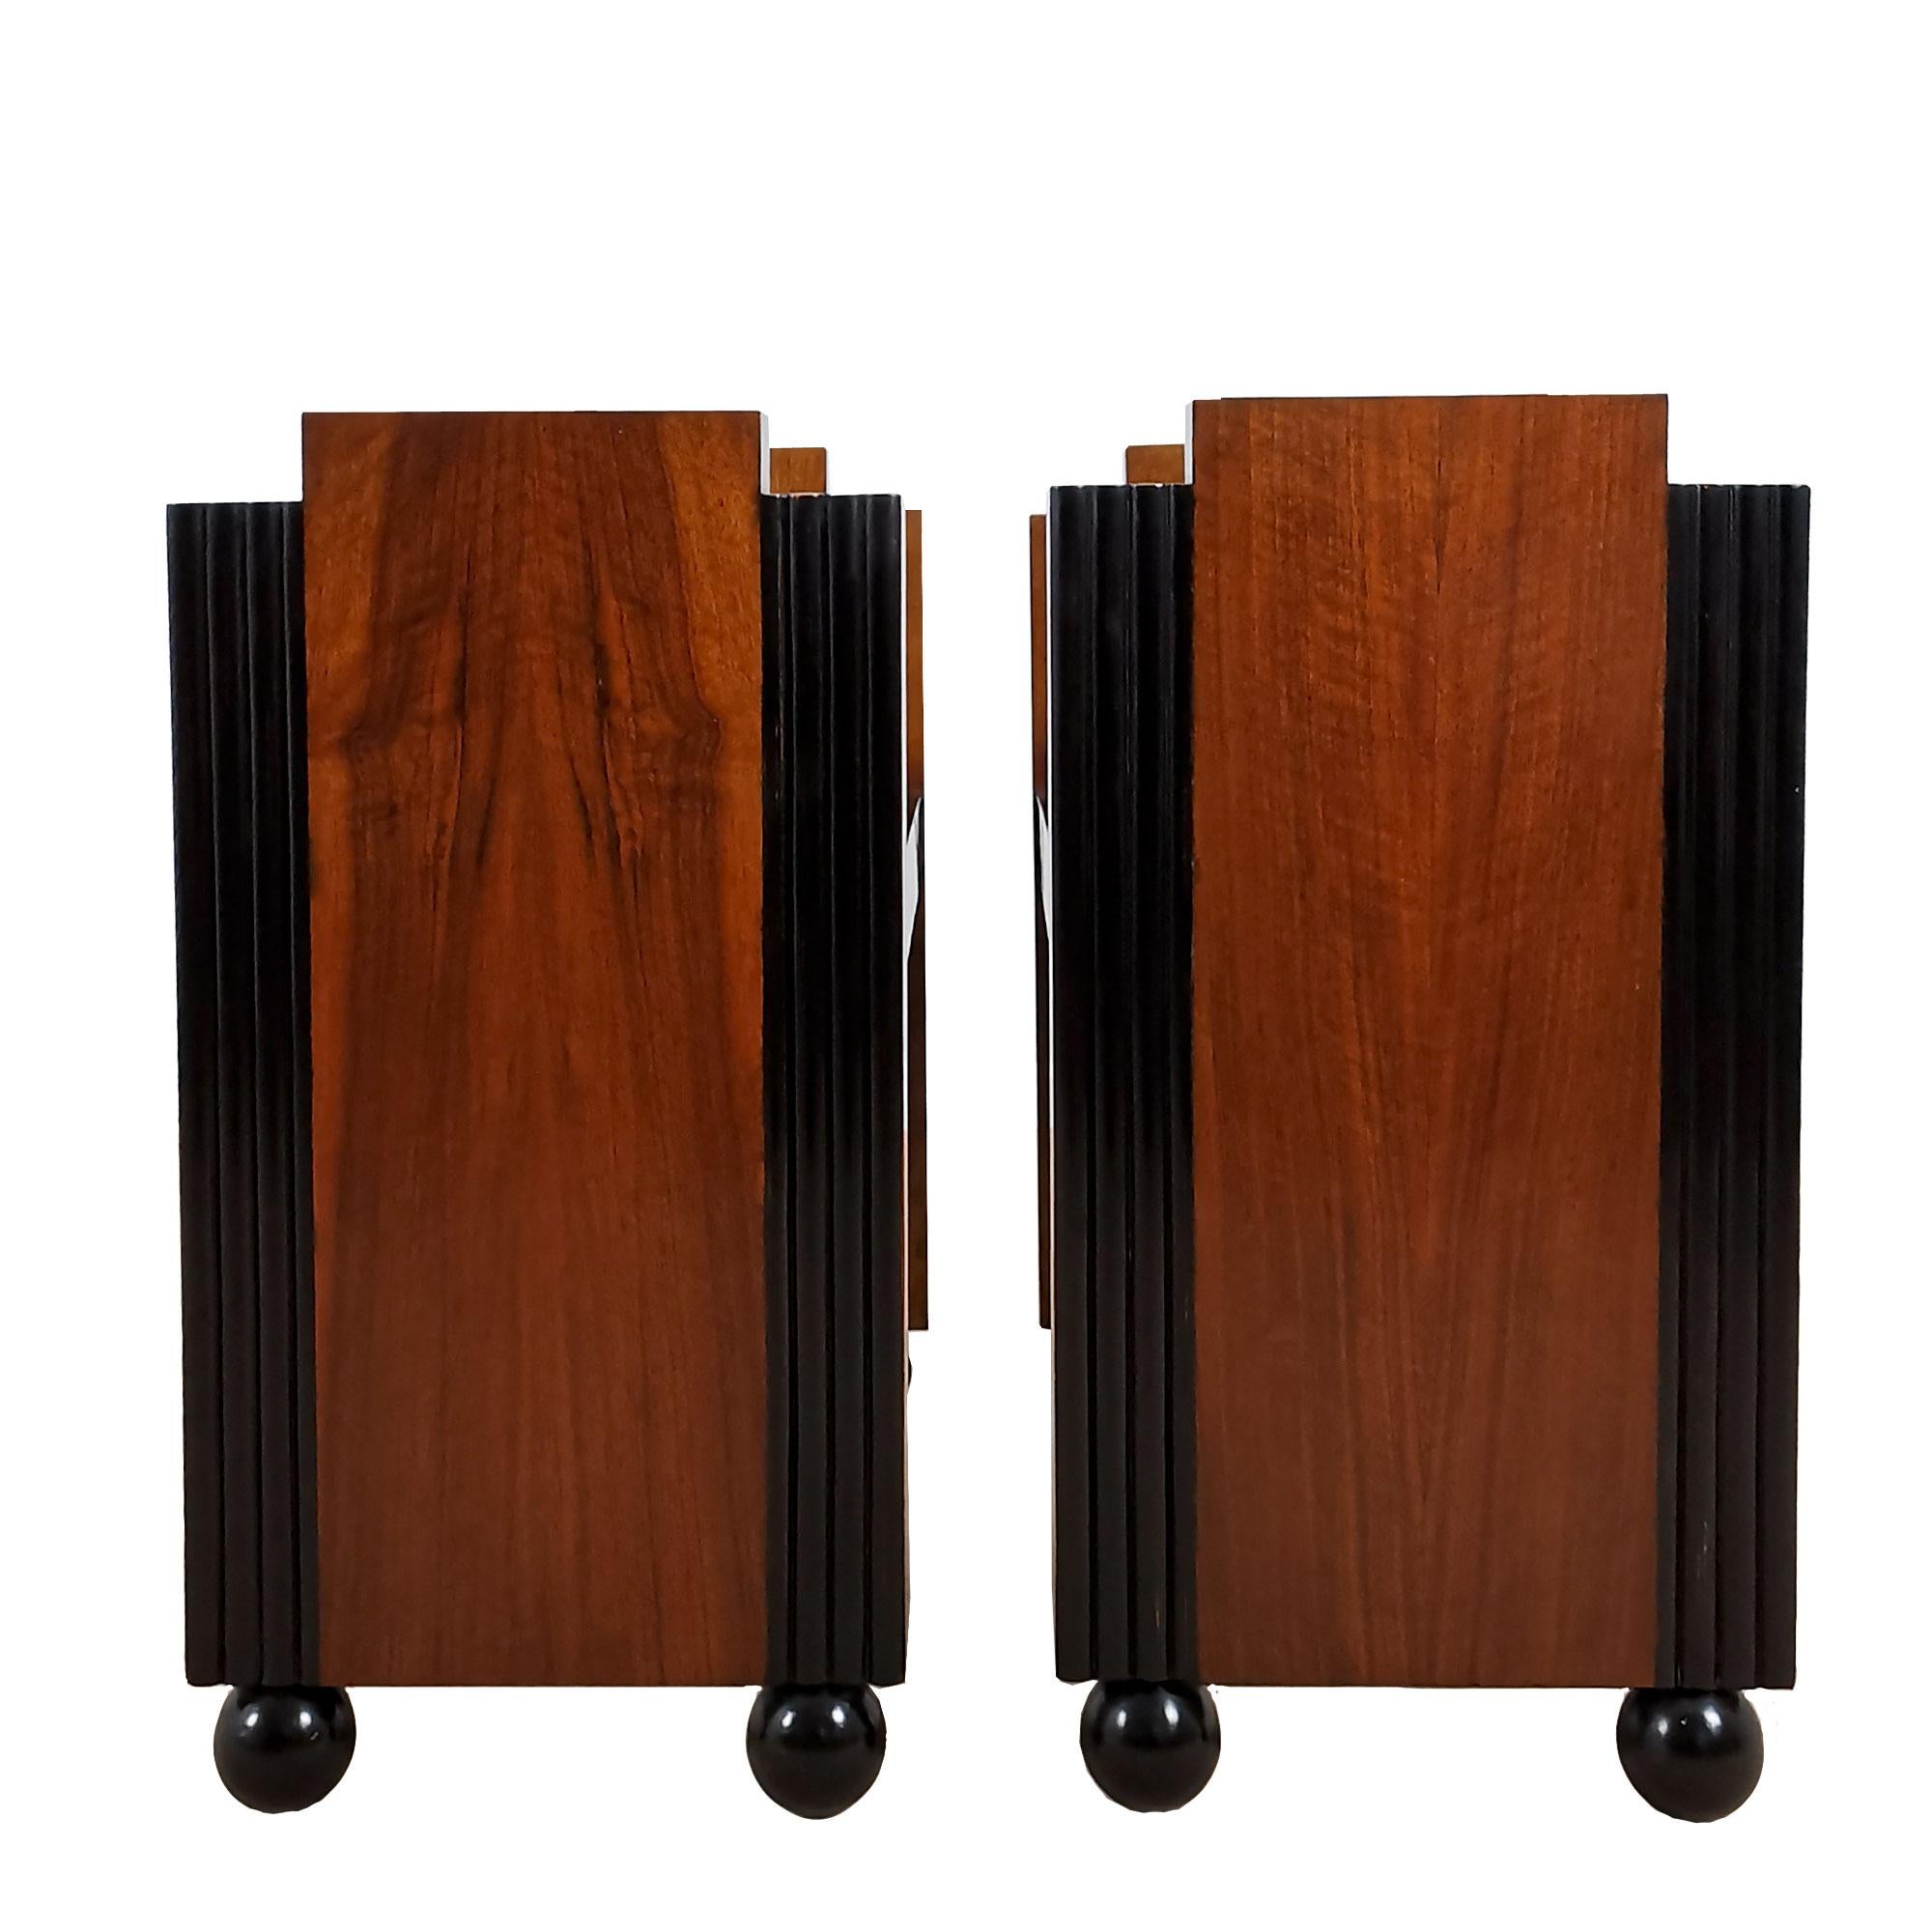 Mid-20th Century 1930's Pair of Art Deco Cubist Banquettes, Walnut, Japanese Fabric, Barcelona